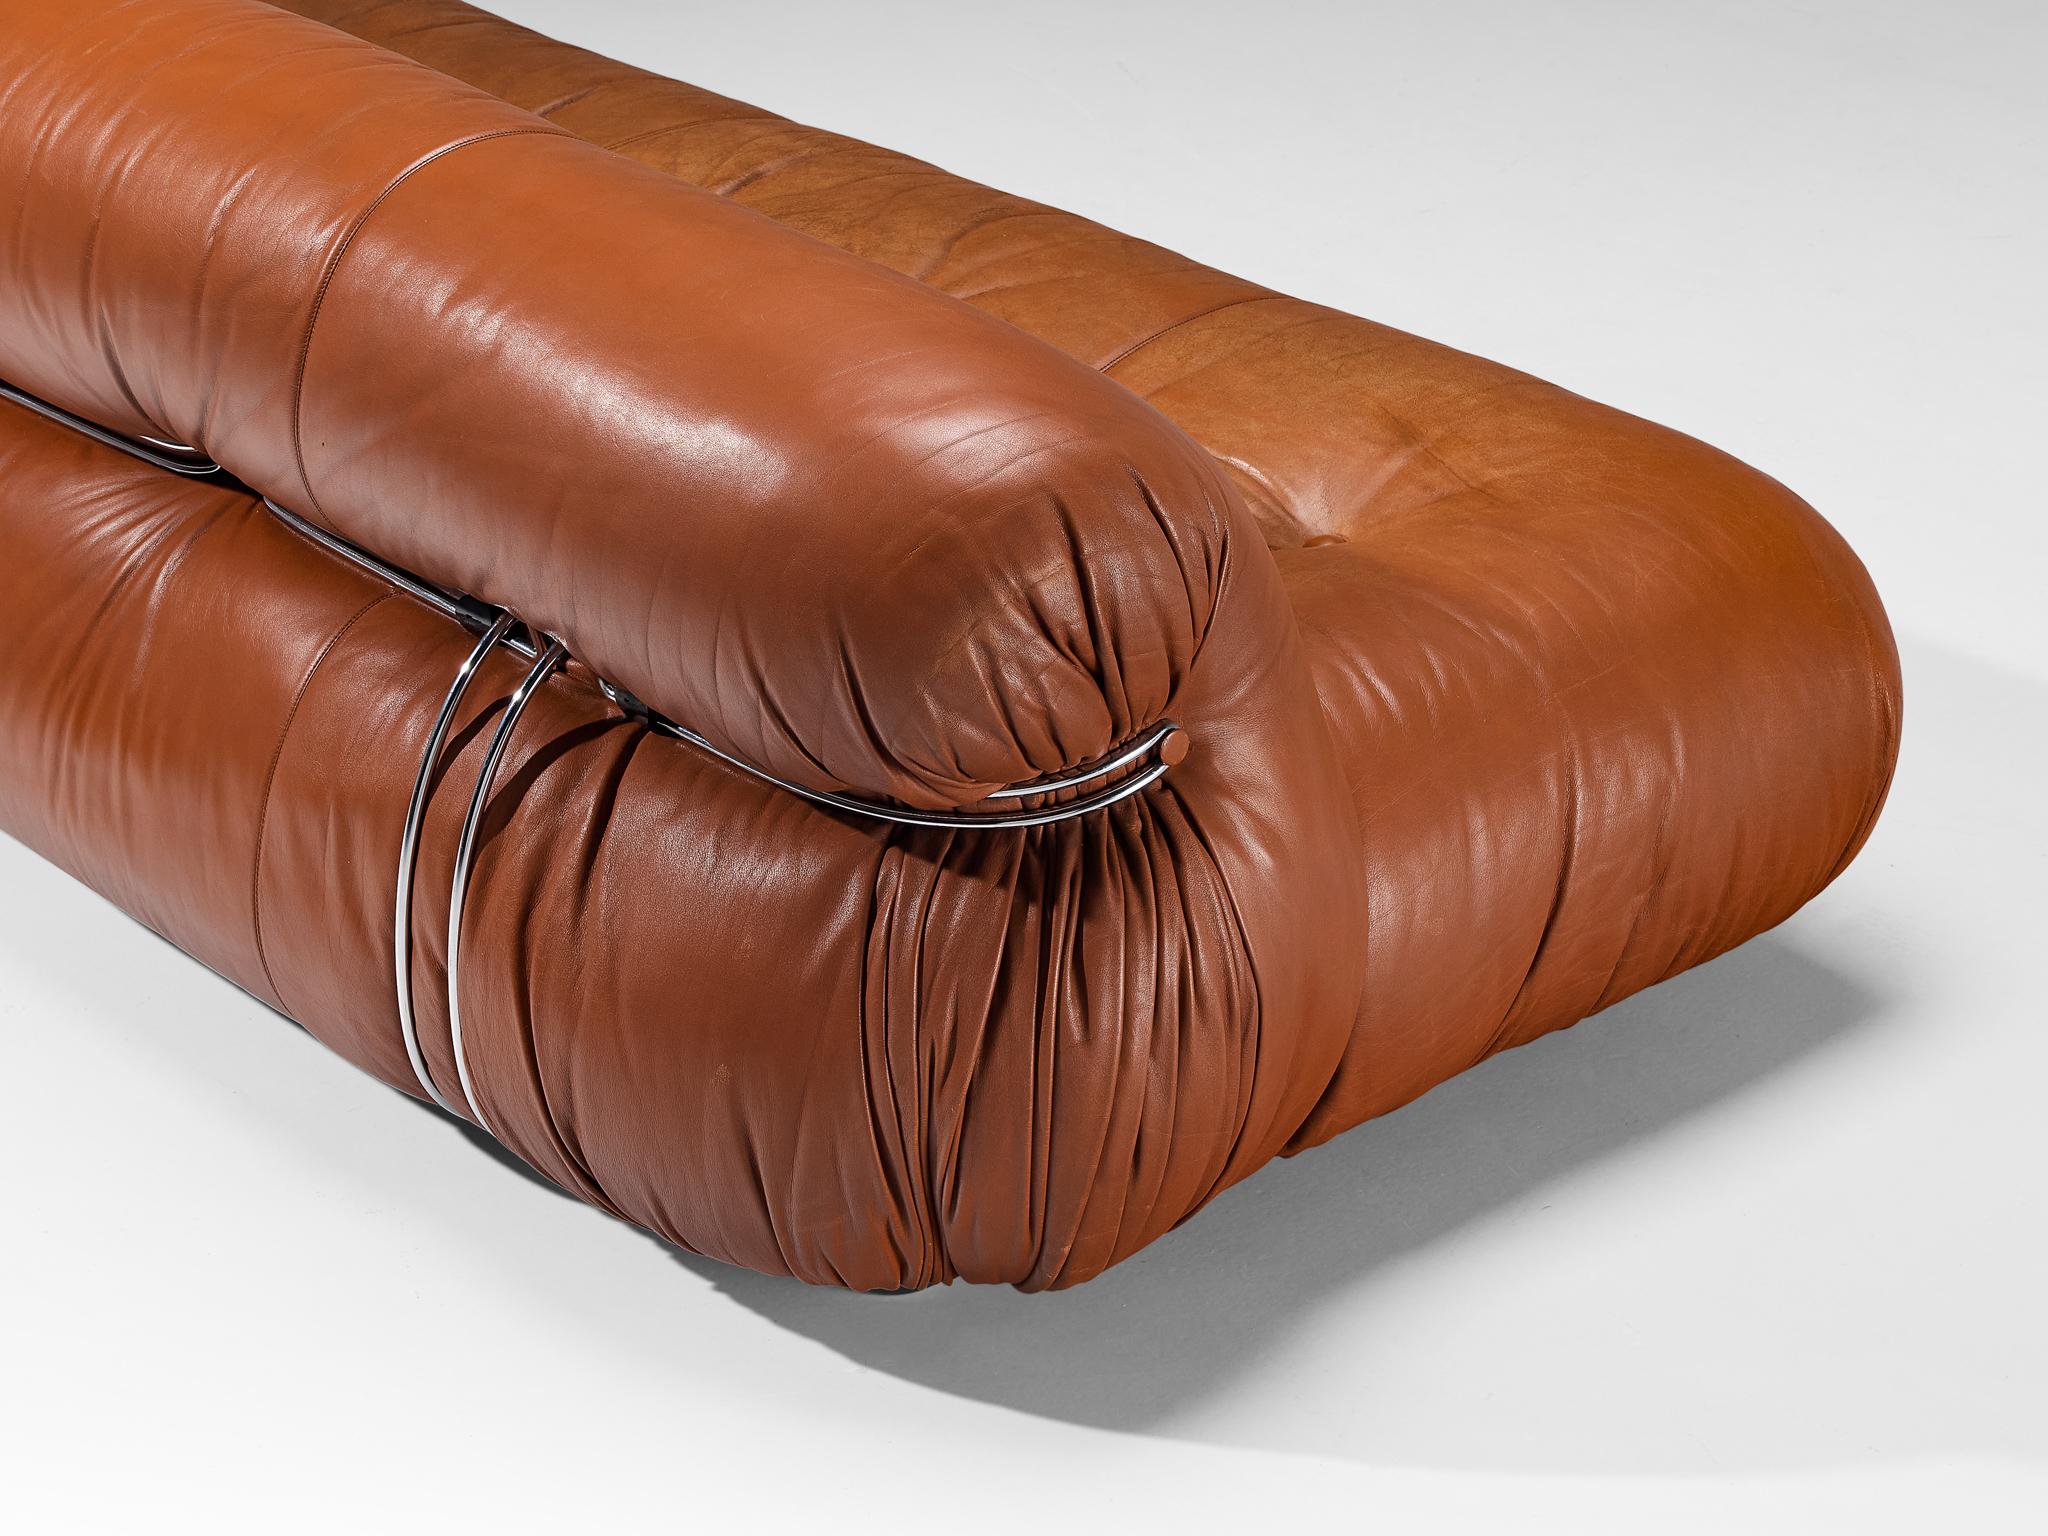 Afra & Tobia Scarpa 'Soriana' Sofa in Patinated Brown Leather 1